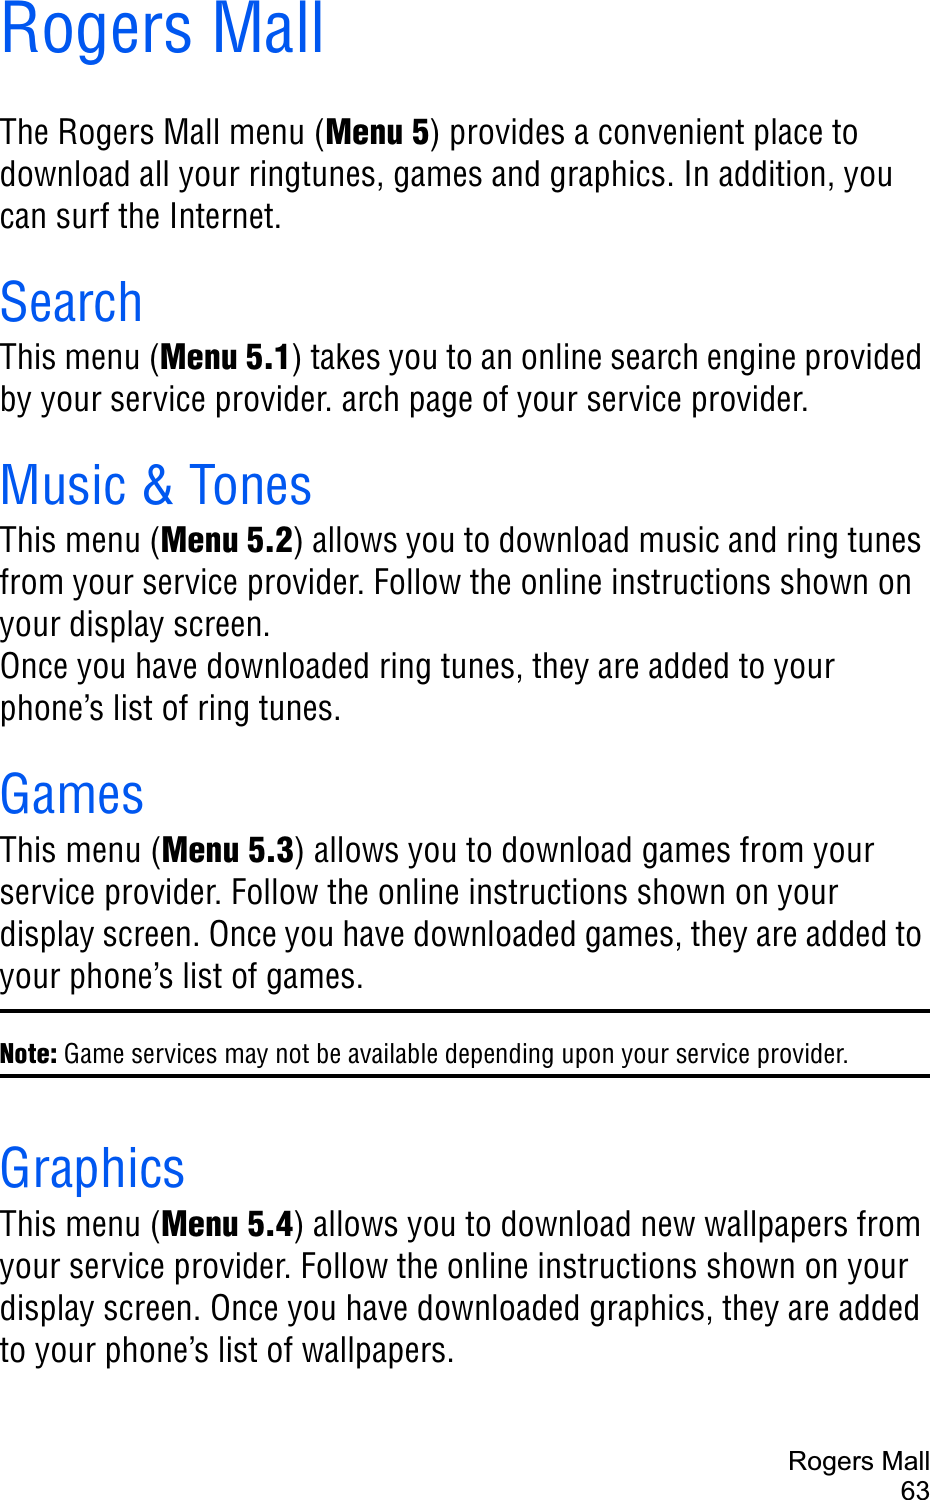 Rogers Mall63Rogers MallThe Rogers Mall menu (Menu 5) provides a convenient place to download all your ringtunes, games and graphics. In addition, you can surf the Internet.SearchThis menu (Menu 5.1) takes you to an online search engine provided by your service provider. arch page of your service provider.Music &amp; TonesThis menu (Menu 5.2) allows you to download music and ring tunes from your service provider. Follow the online instructions shown on your display screen. Once you have downloaded ring tunes, they are added to your phone’s list of ring tunes.GamesThis menu (Menu 5.3) allows you to download games from your service provider. Follow the online instructions shown on your display screen. Once you have downloaded games, they are added to your phone’s list of games.Note: Game services may not be available depending upon your service provider.GraphicsThis menu (Menu 5.4) allows you to download new wallpapers from your service provider. Follow the online instructions shown on your display screen. Once you have downloaded graphics, they are added to your phone’s list of wallpapers.